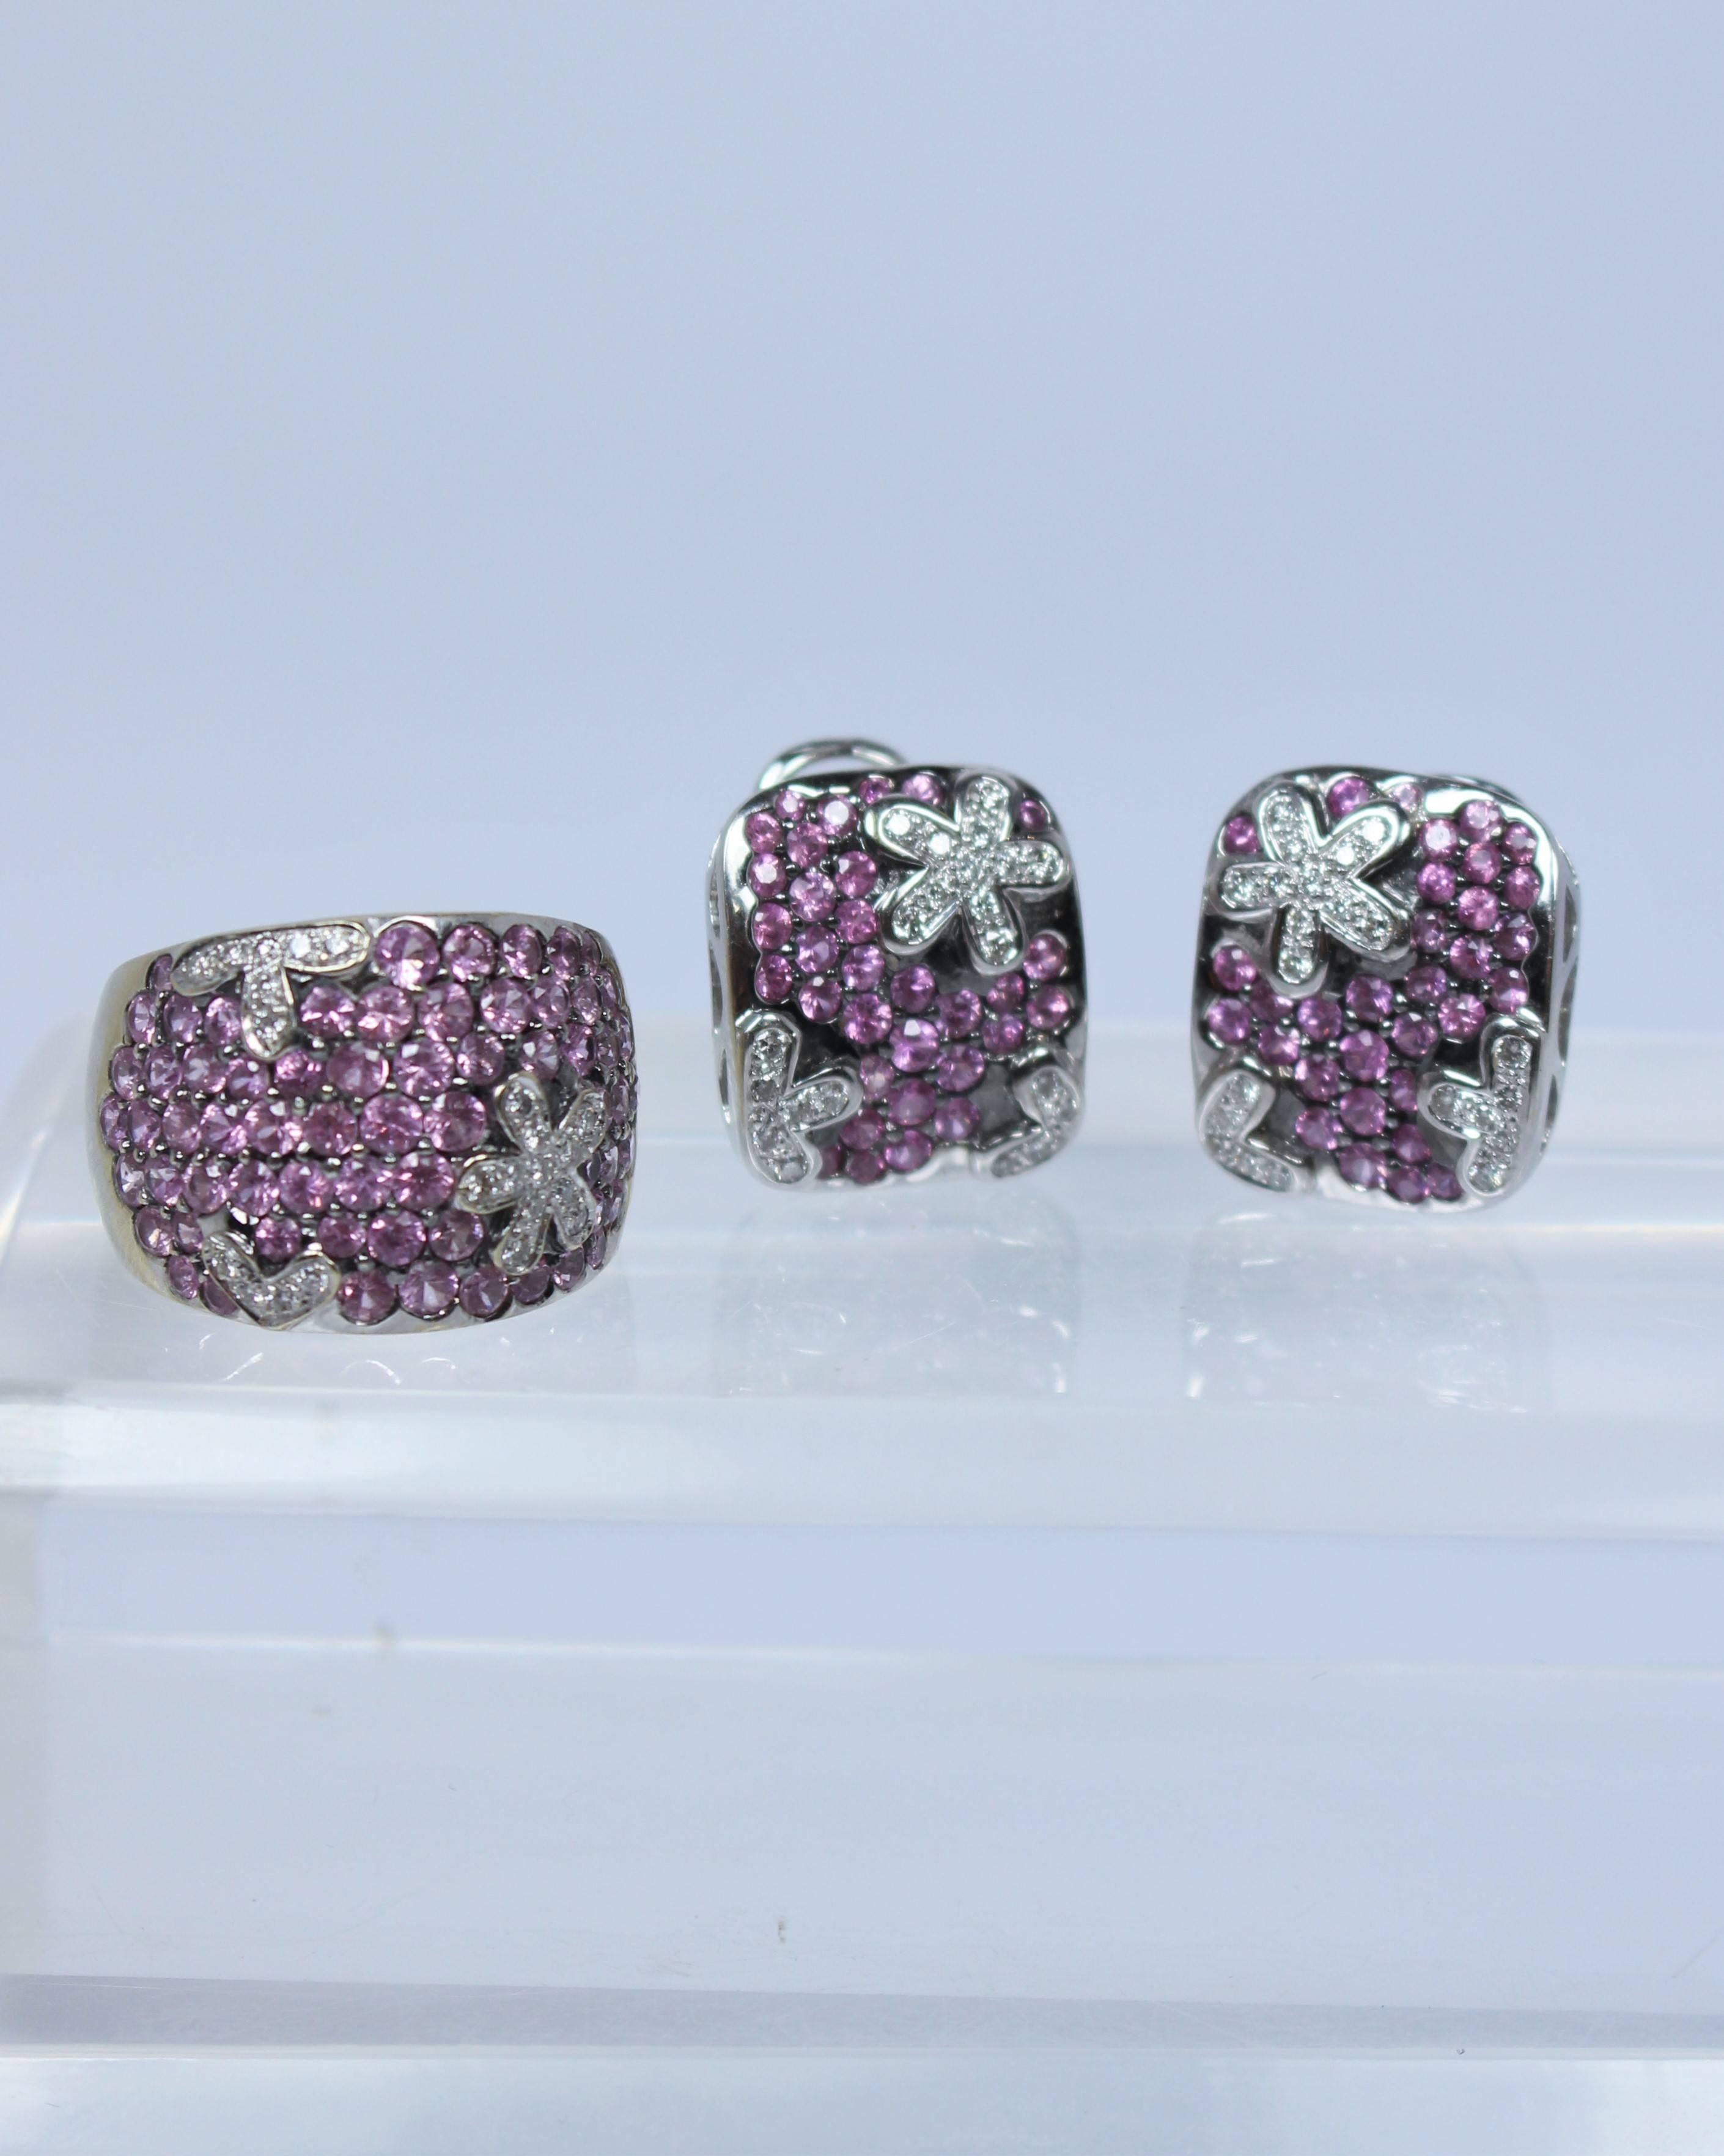 This set is composed of 18KT white gold, pink tourmaline, and white diamonds. The earrings feature a post backing with tension clasp. Ring is size 7. In excellent vintage condition.

Specs: 
14KT White Gold
Pink Tourmaline
White